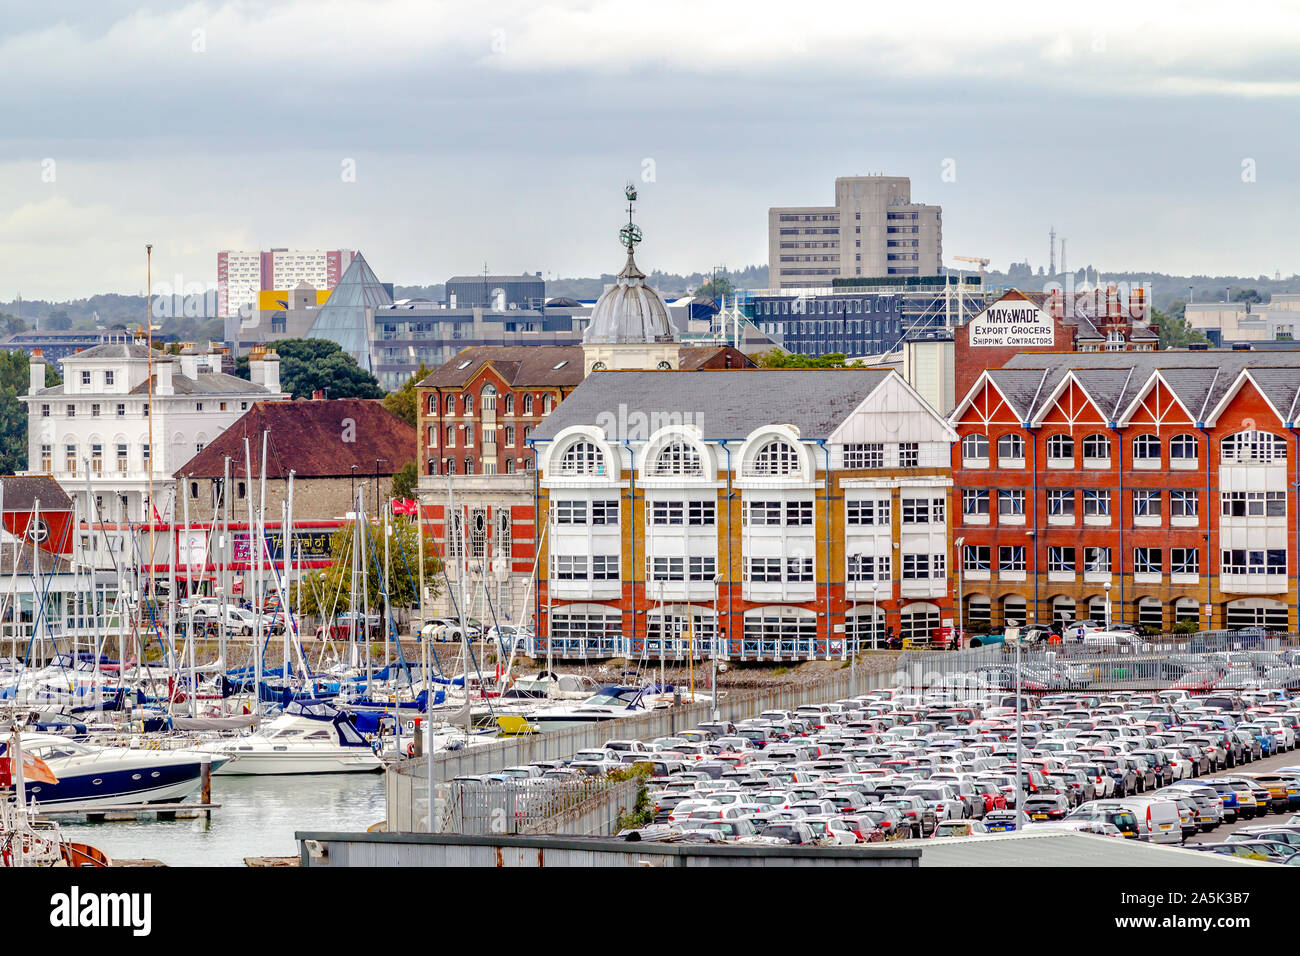 Looking over the yachts and parked cars towards the city centre, Southampton, Hampshre, UK. Stock Photo